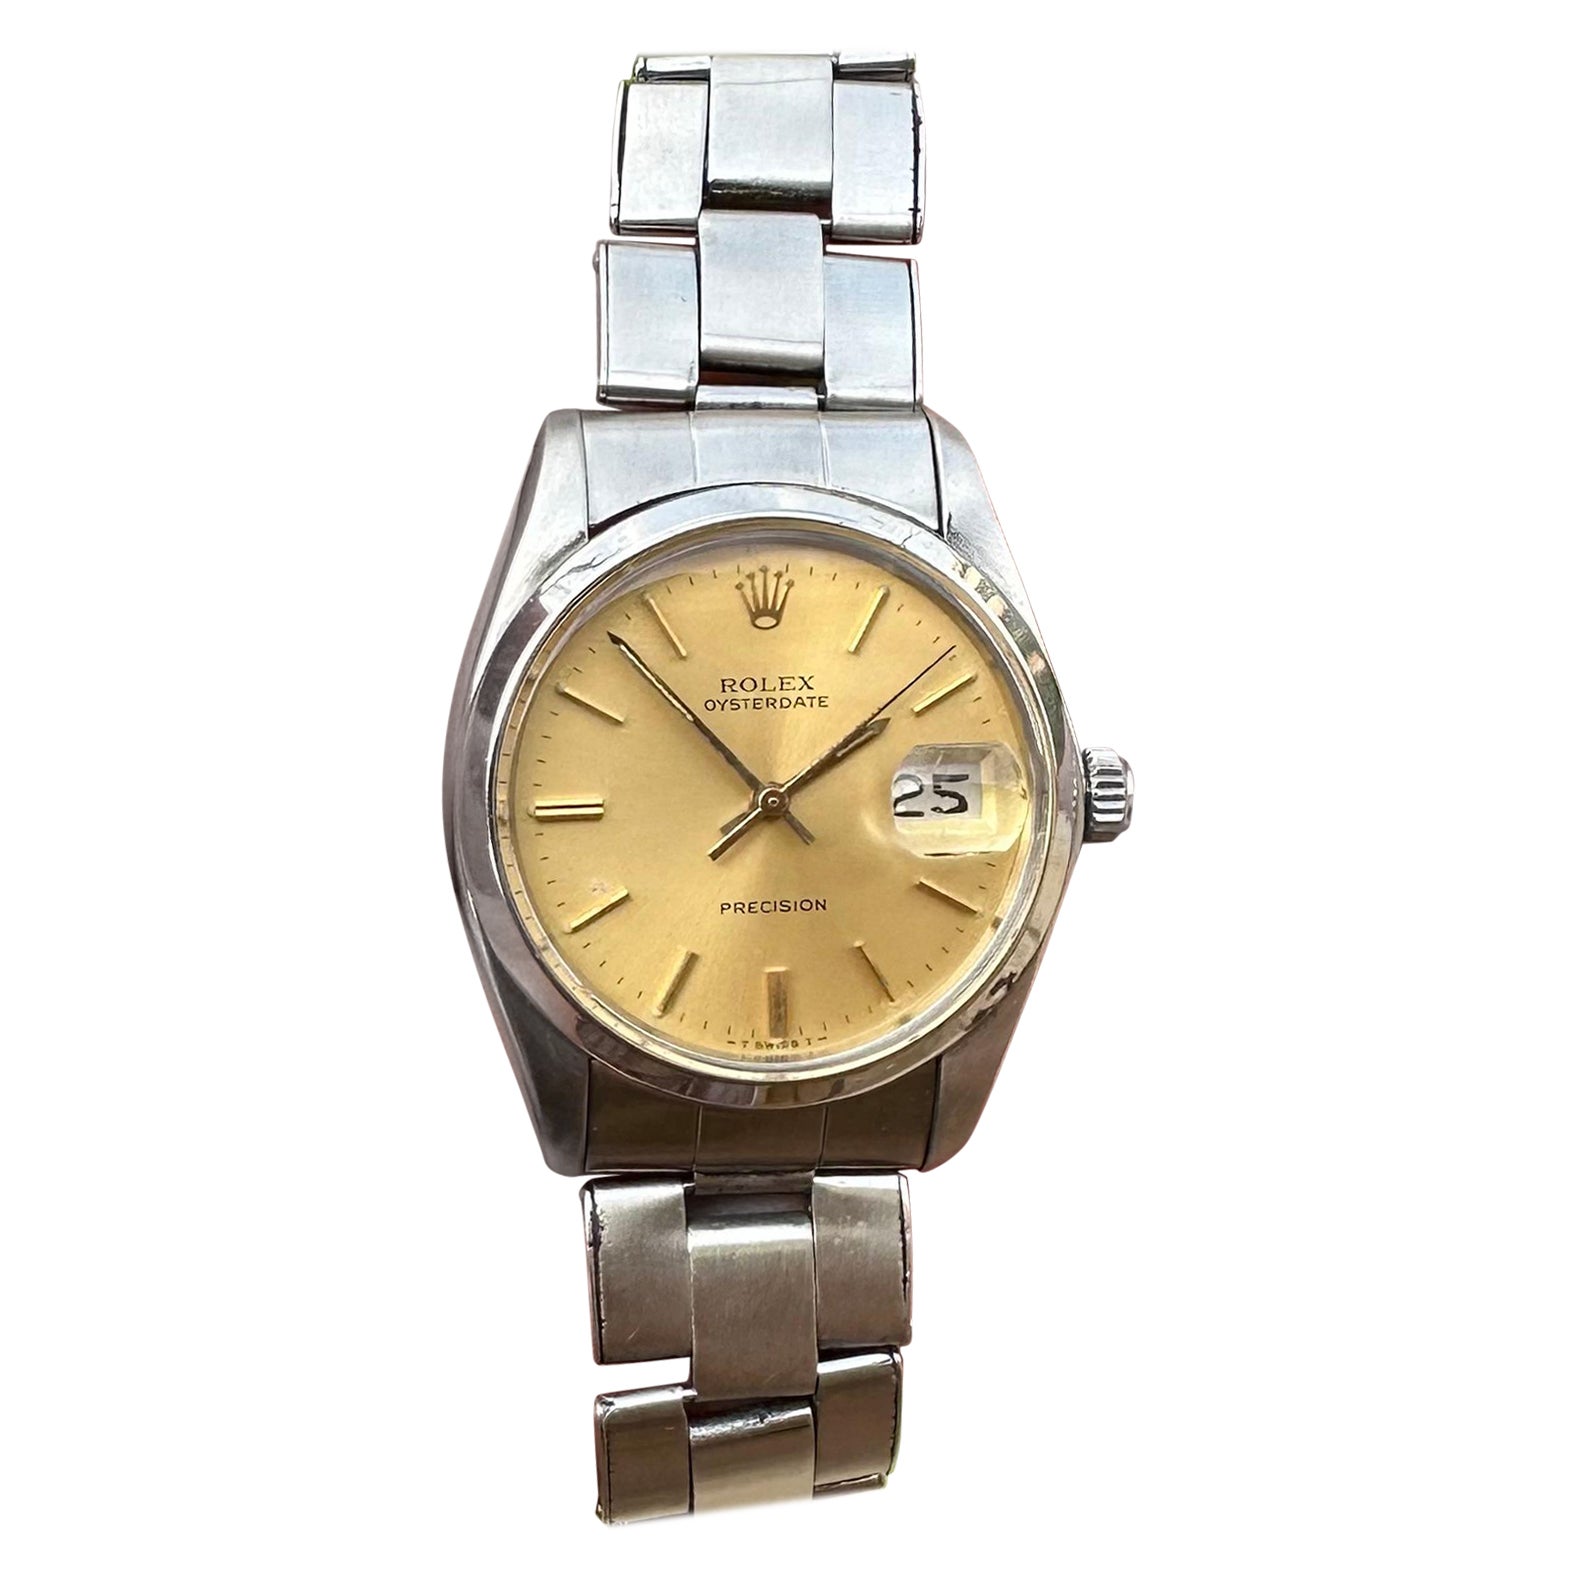 Rolex Oysterdate Precision 6694 Champagne Dial Stainless Steel Watch For Sale